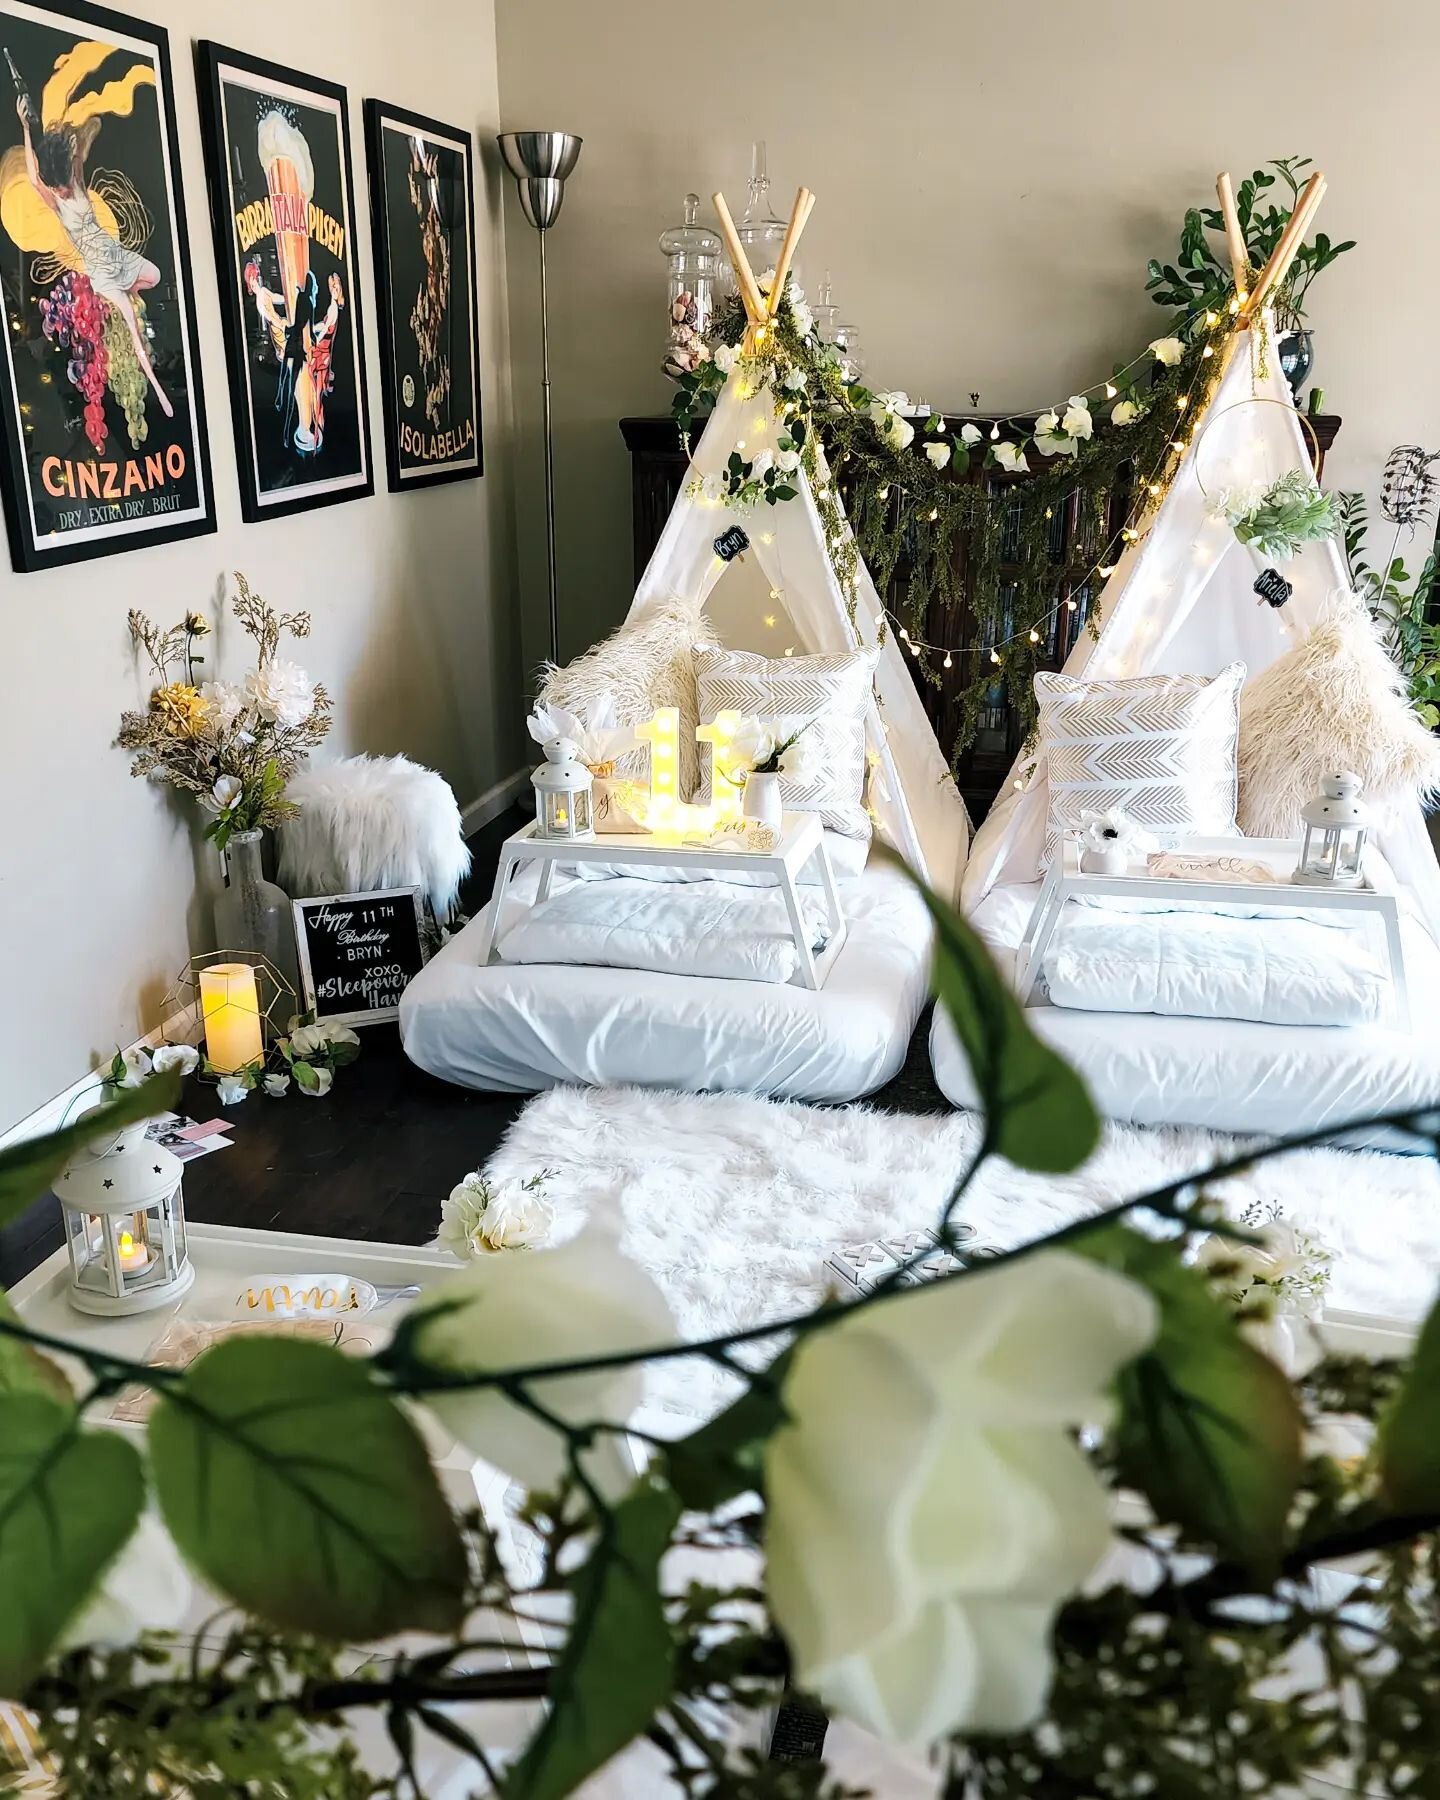 Happy 11th Birthday to Bryn! 
We hope she had a blast with her friends last night!

This is our Boho Chic theme in our premium package. You can book this too by heading to Sleepoverhaven.com!

.
.
.
.
.
.
.
#sleepover #Sleepoverparty #teepeeParty #te